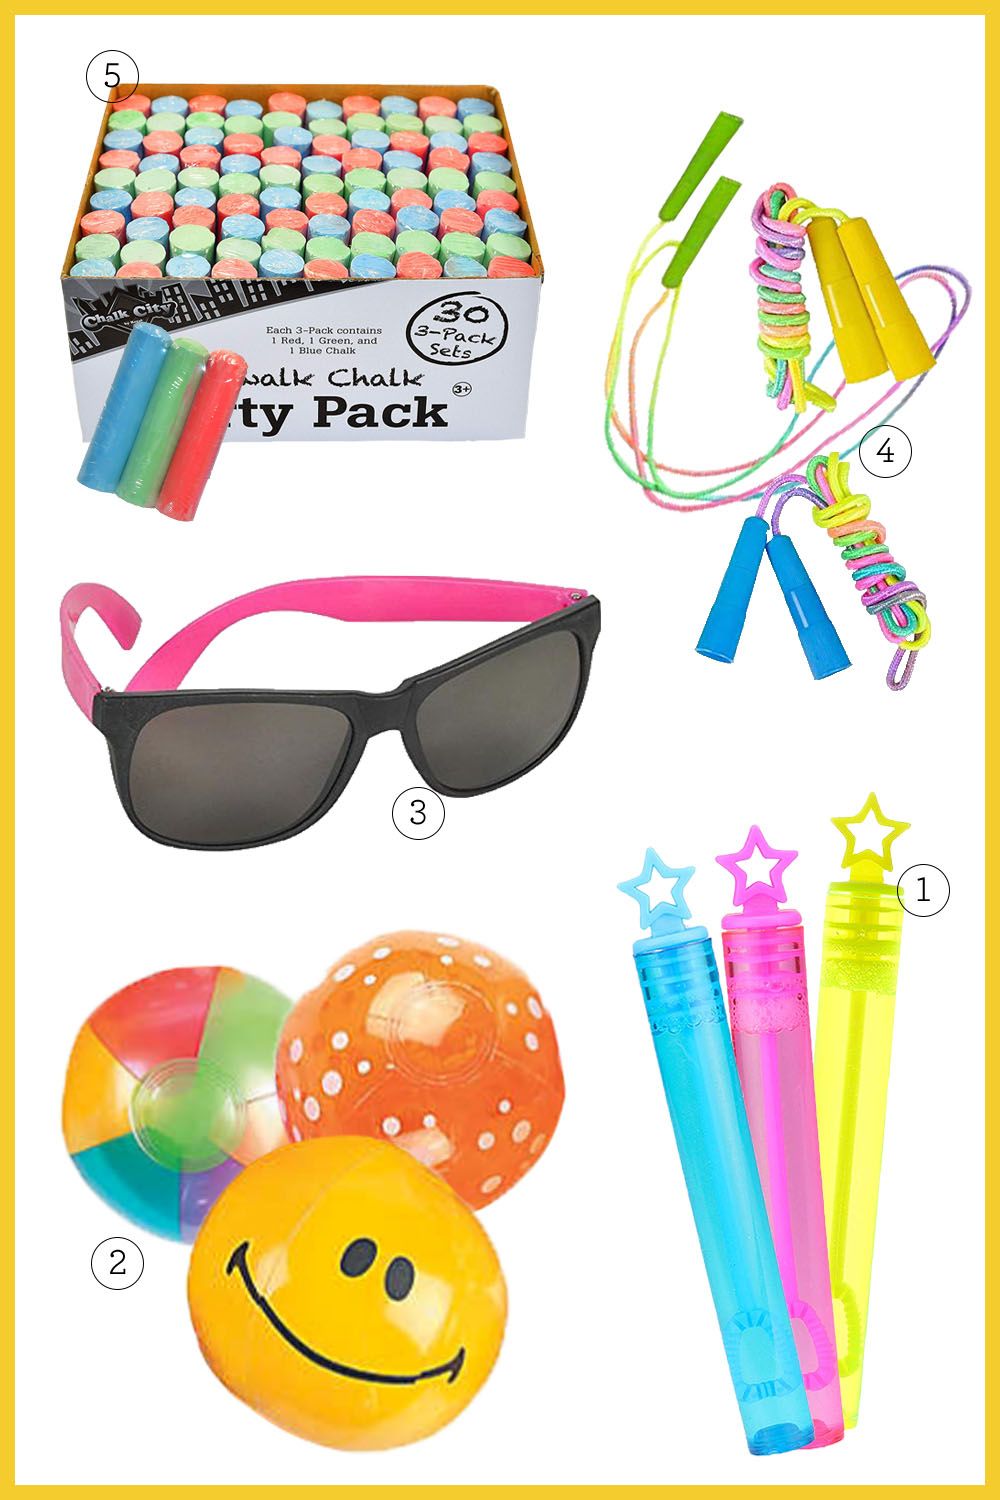 Top more than 78 good goodie bag ideas best - in.cdgdbentre